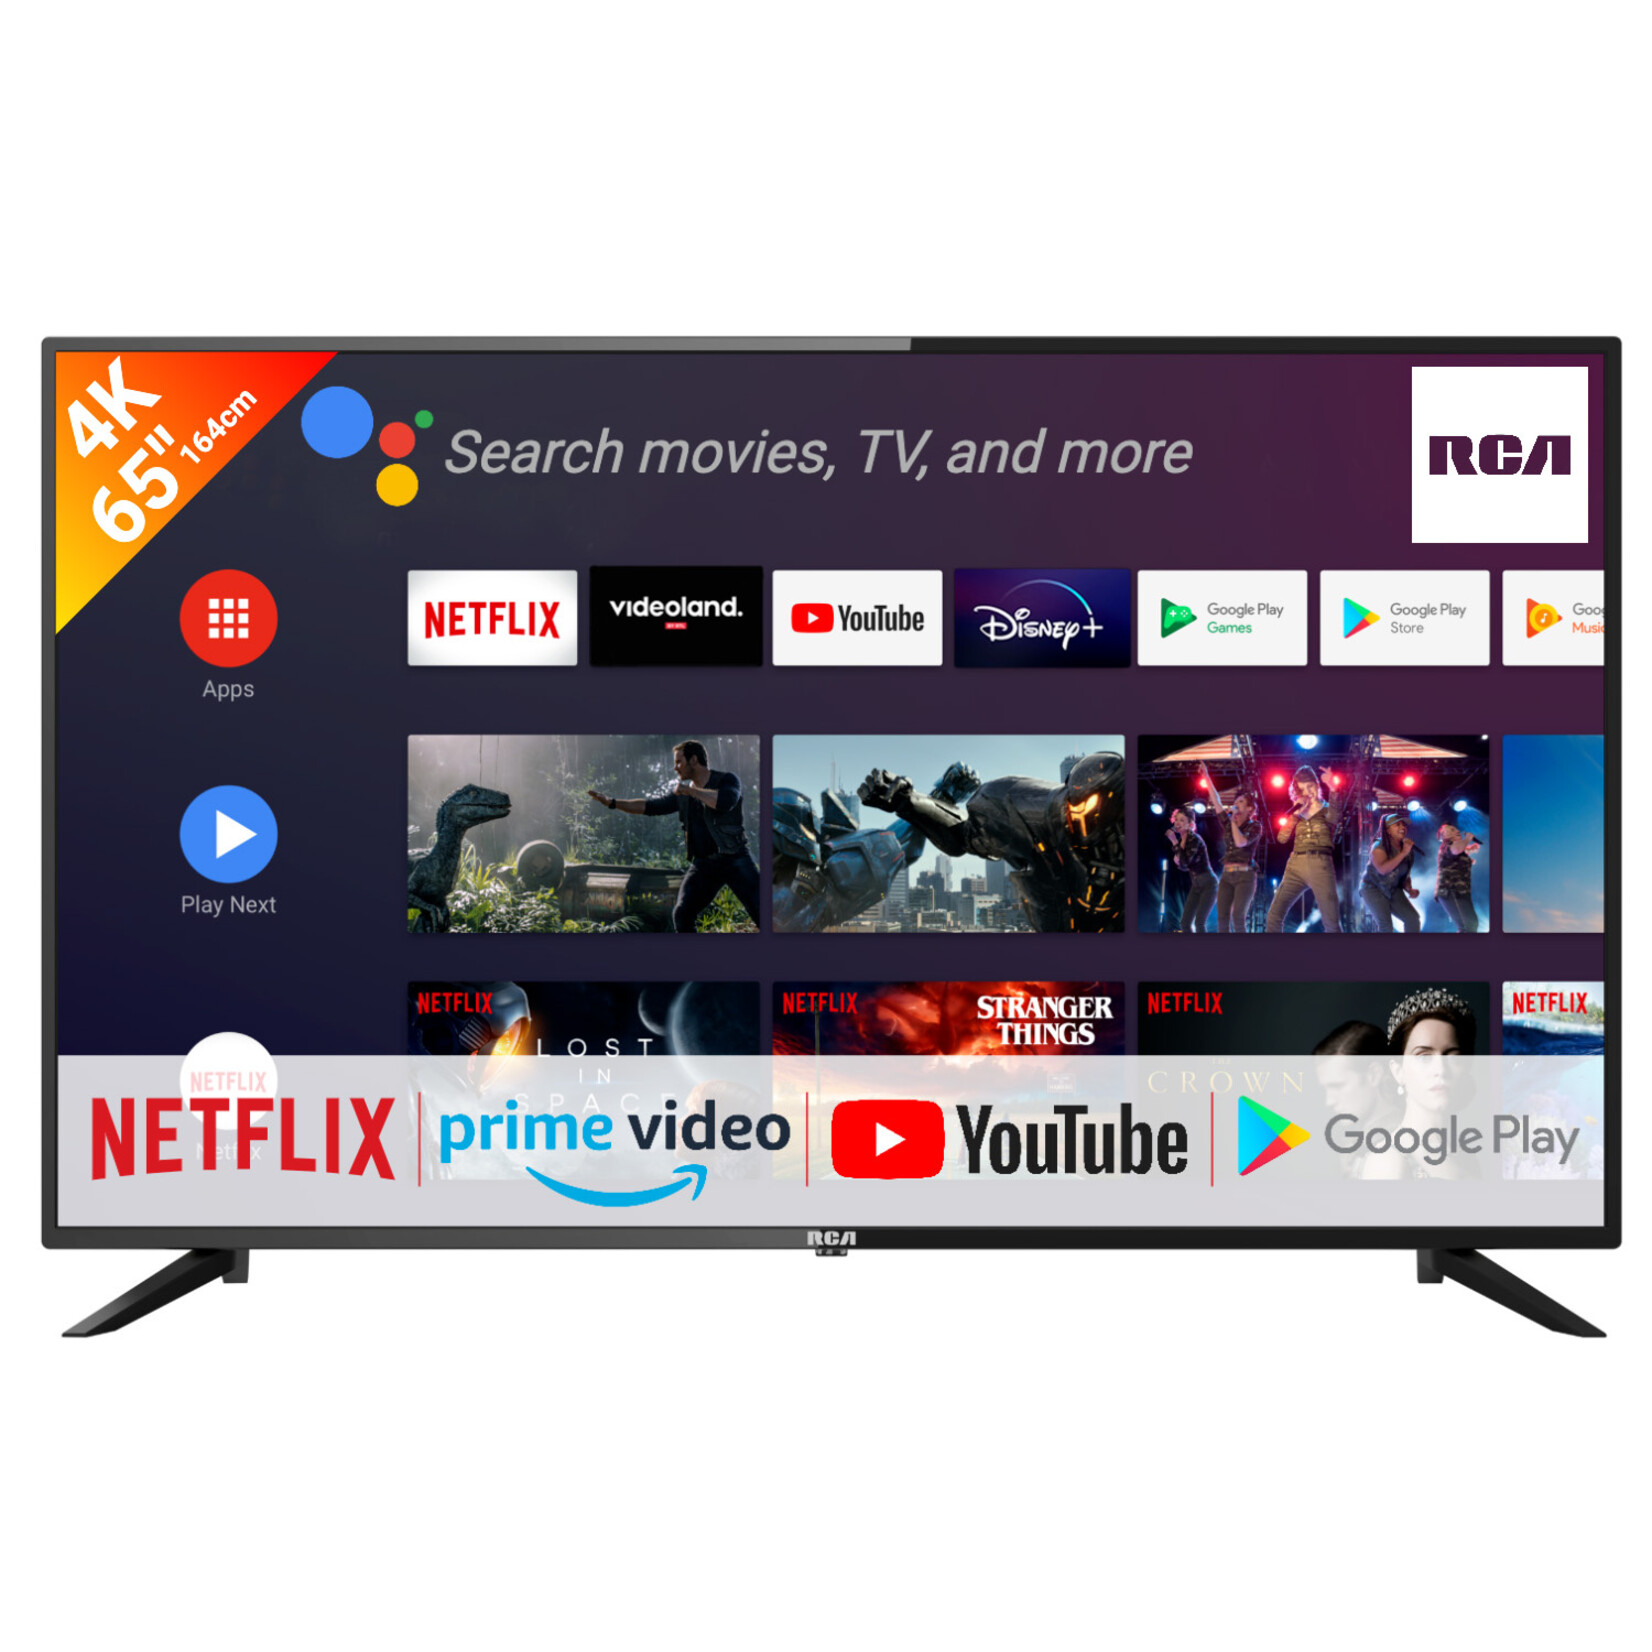 RCA ANDROID TV RS65U2 - AntteQ Group B.V.